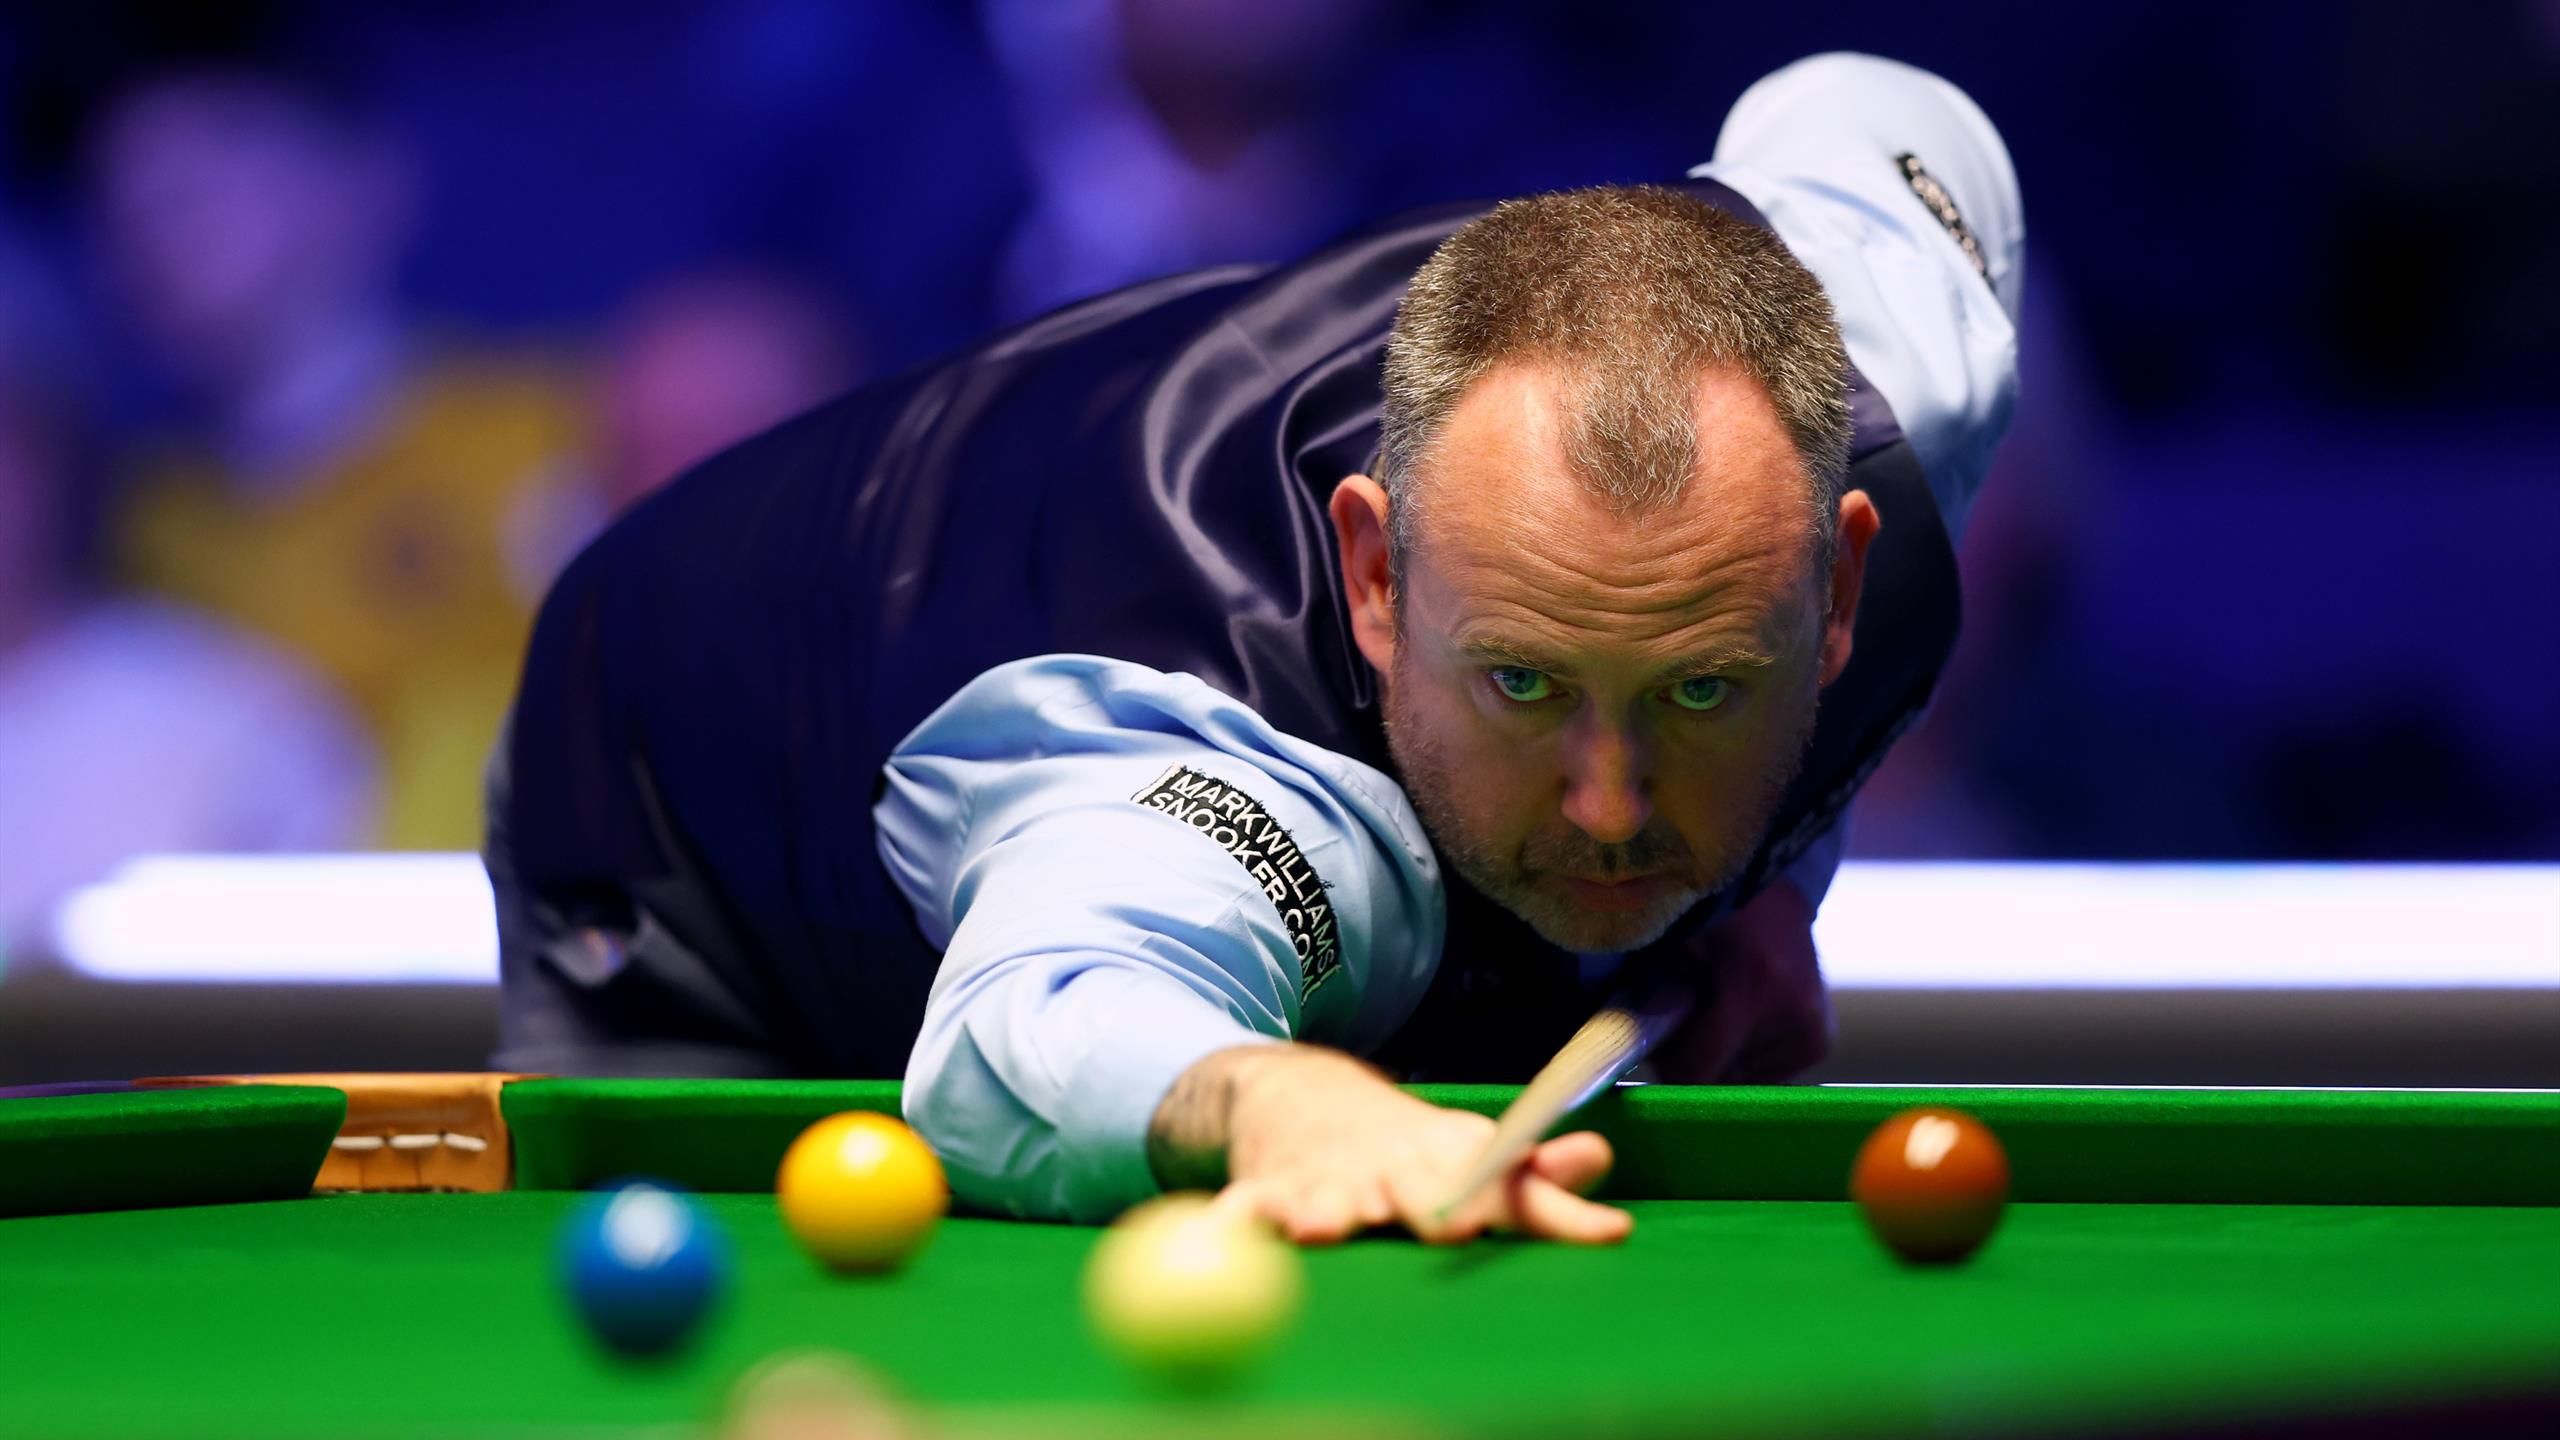 Wuhan Open snooker Mark Williams secures last-64 spot with win over Andres Petrov as Anthony McGill suffers early exit